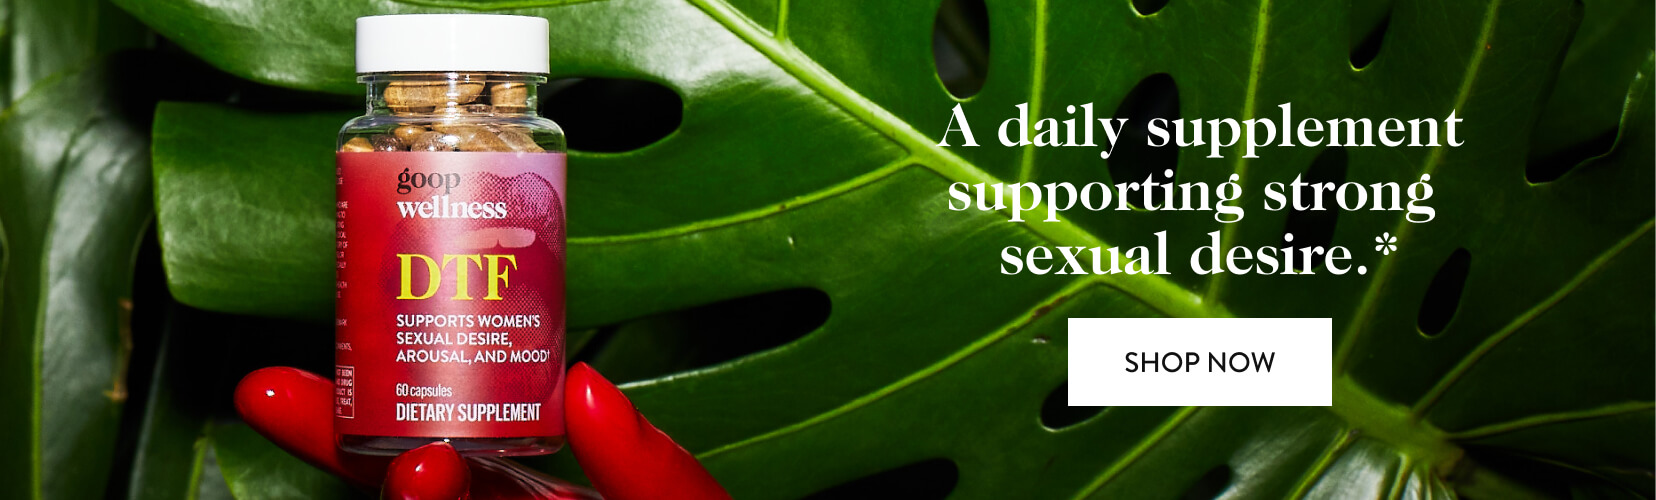 NEW!
      A daily supplement supporting strong sexual desire* - shop now